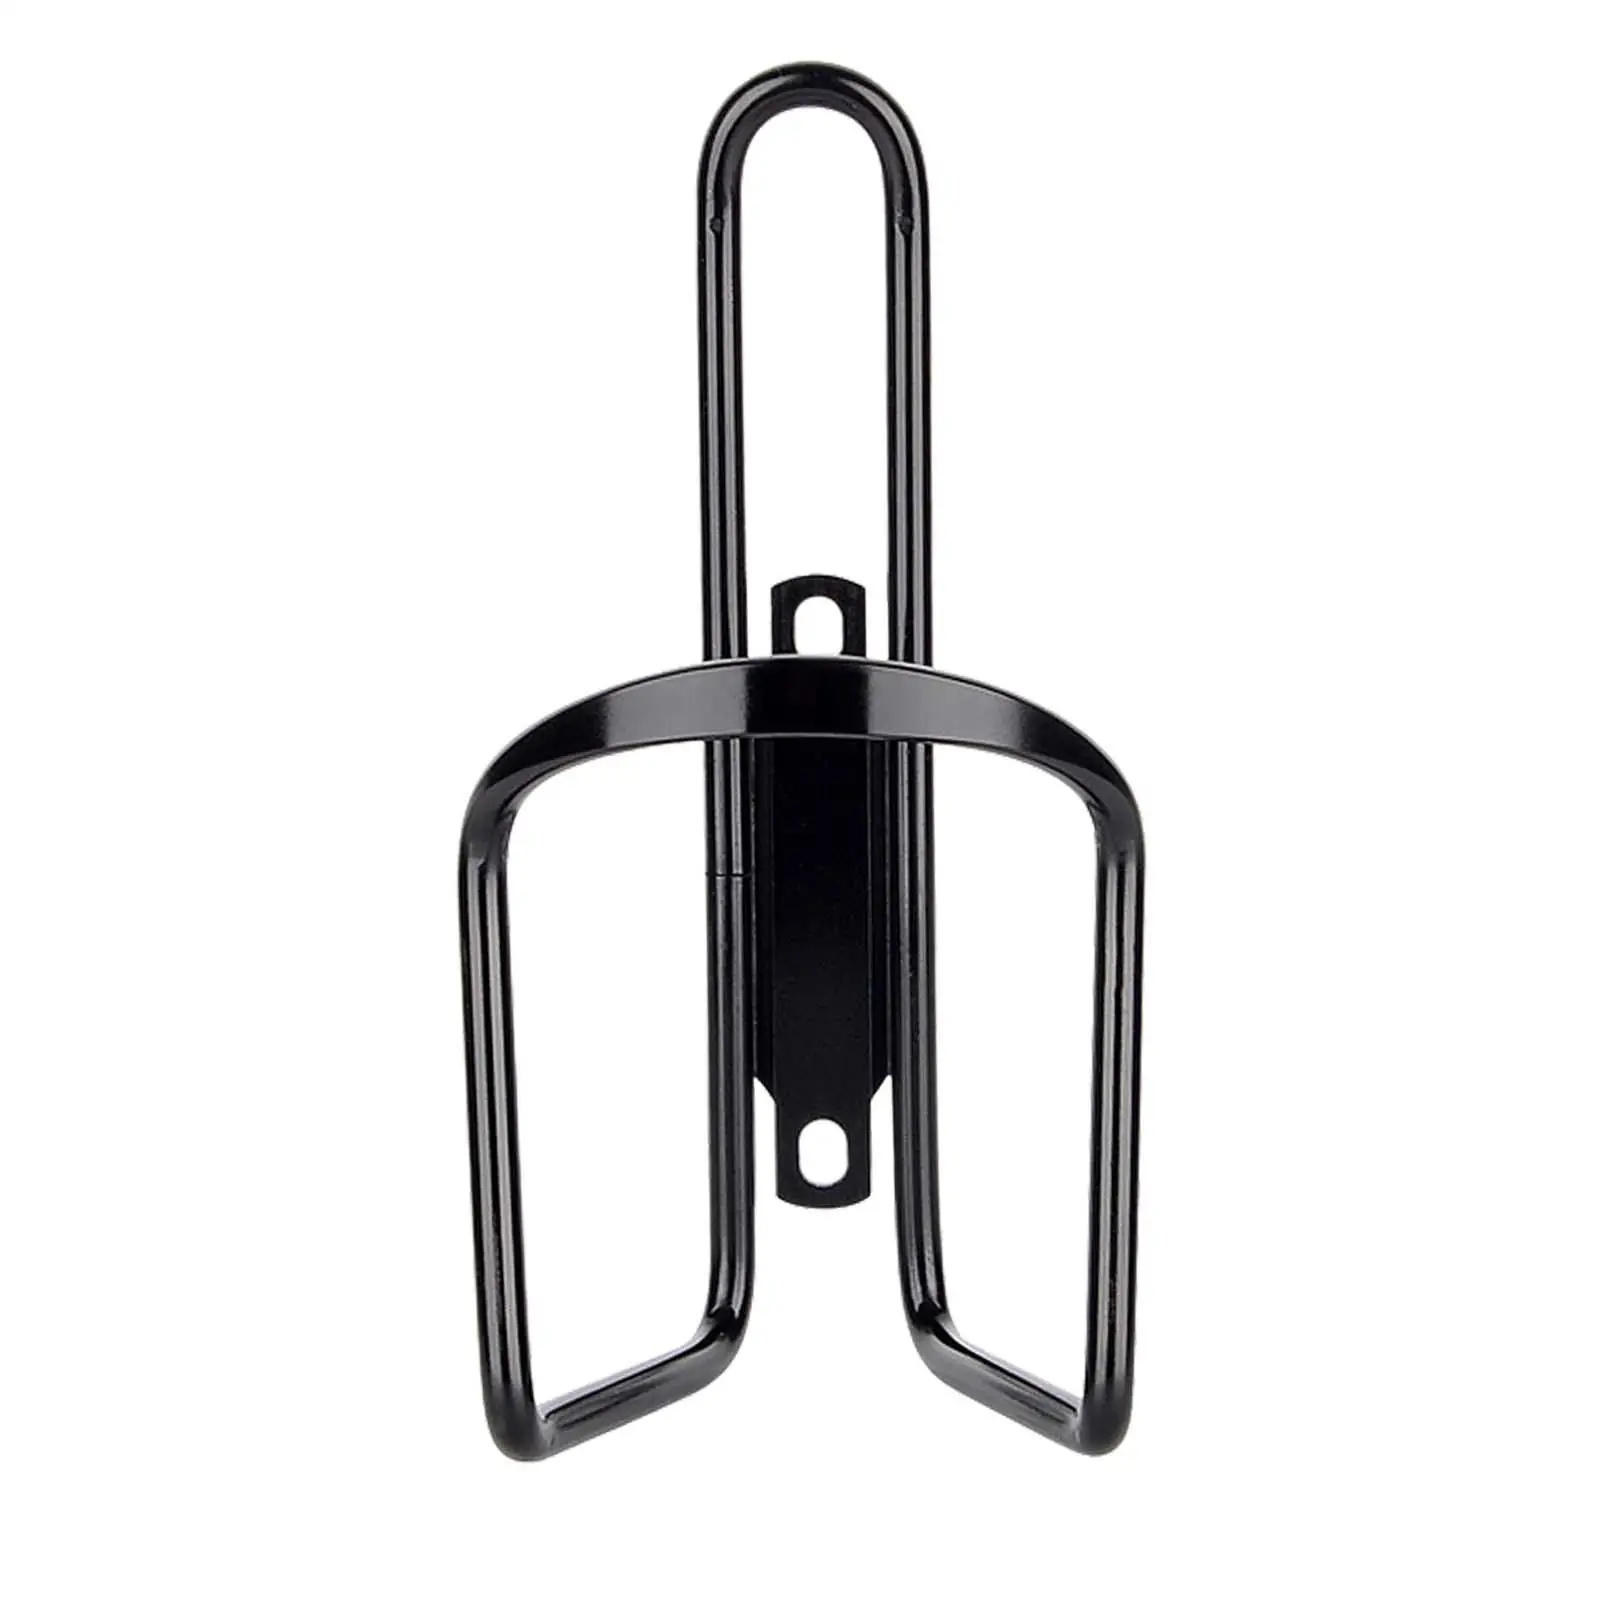 Kettle Cup Holder Drink Rack Carrier Ultralight for Sports Outdoor Fishing